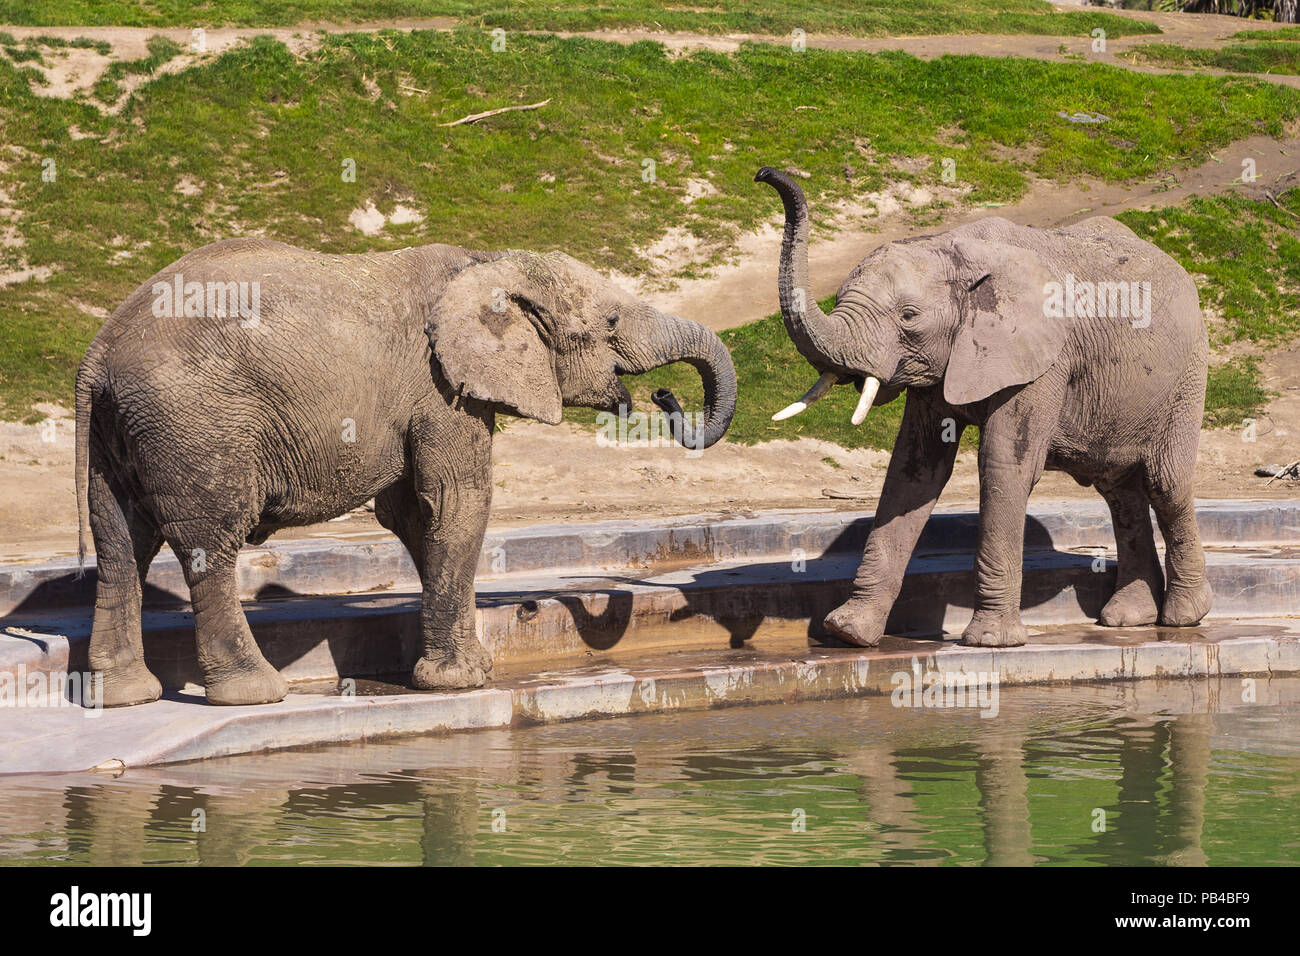 Young elephants play near a watering hole Stock Photo